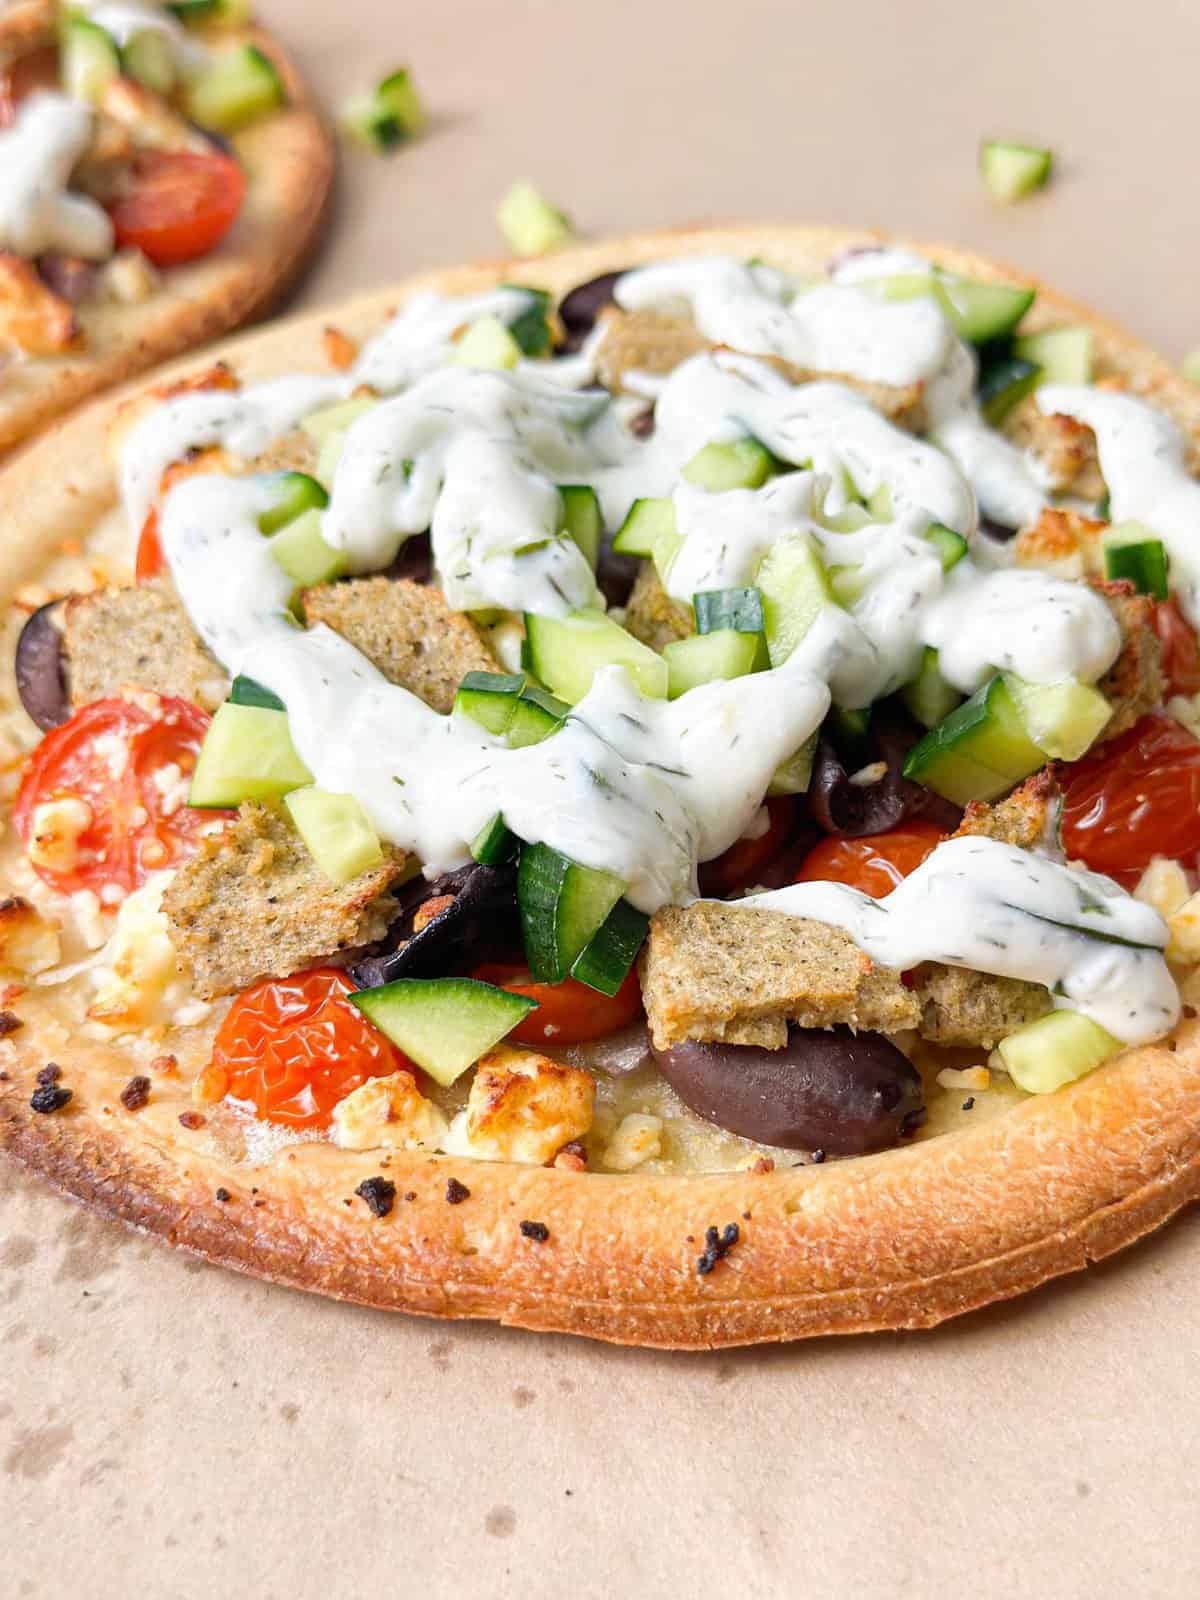 a close up shot of Mediterranean flatbread pizza created from scratch with cherry tomatoes, olives, feta, gyro meat, and more